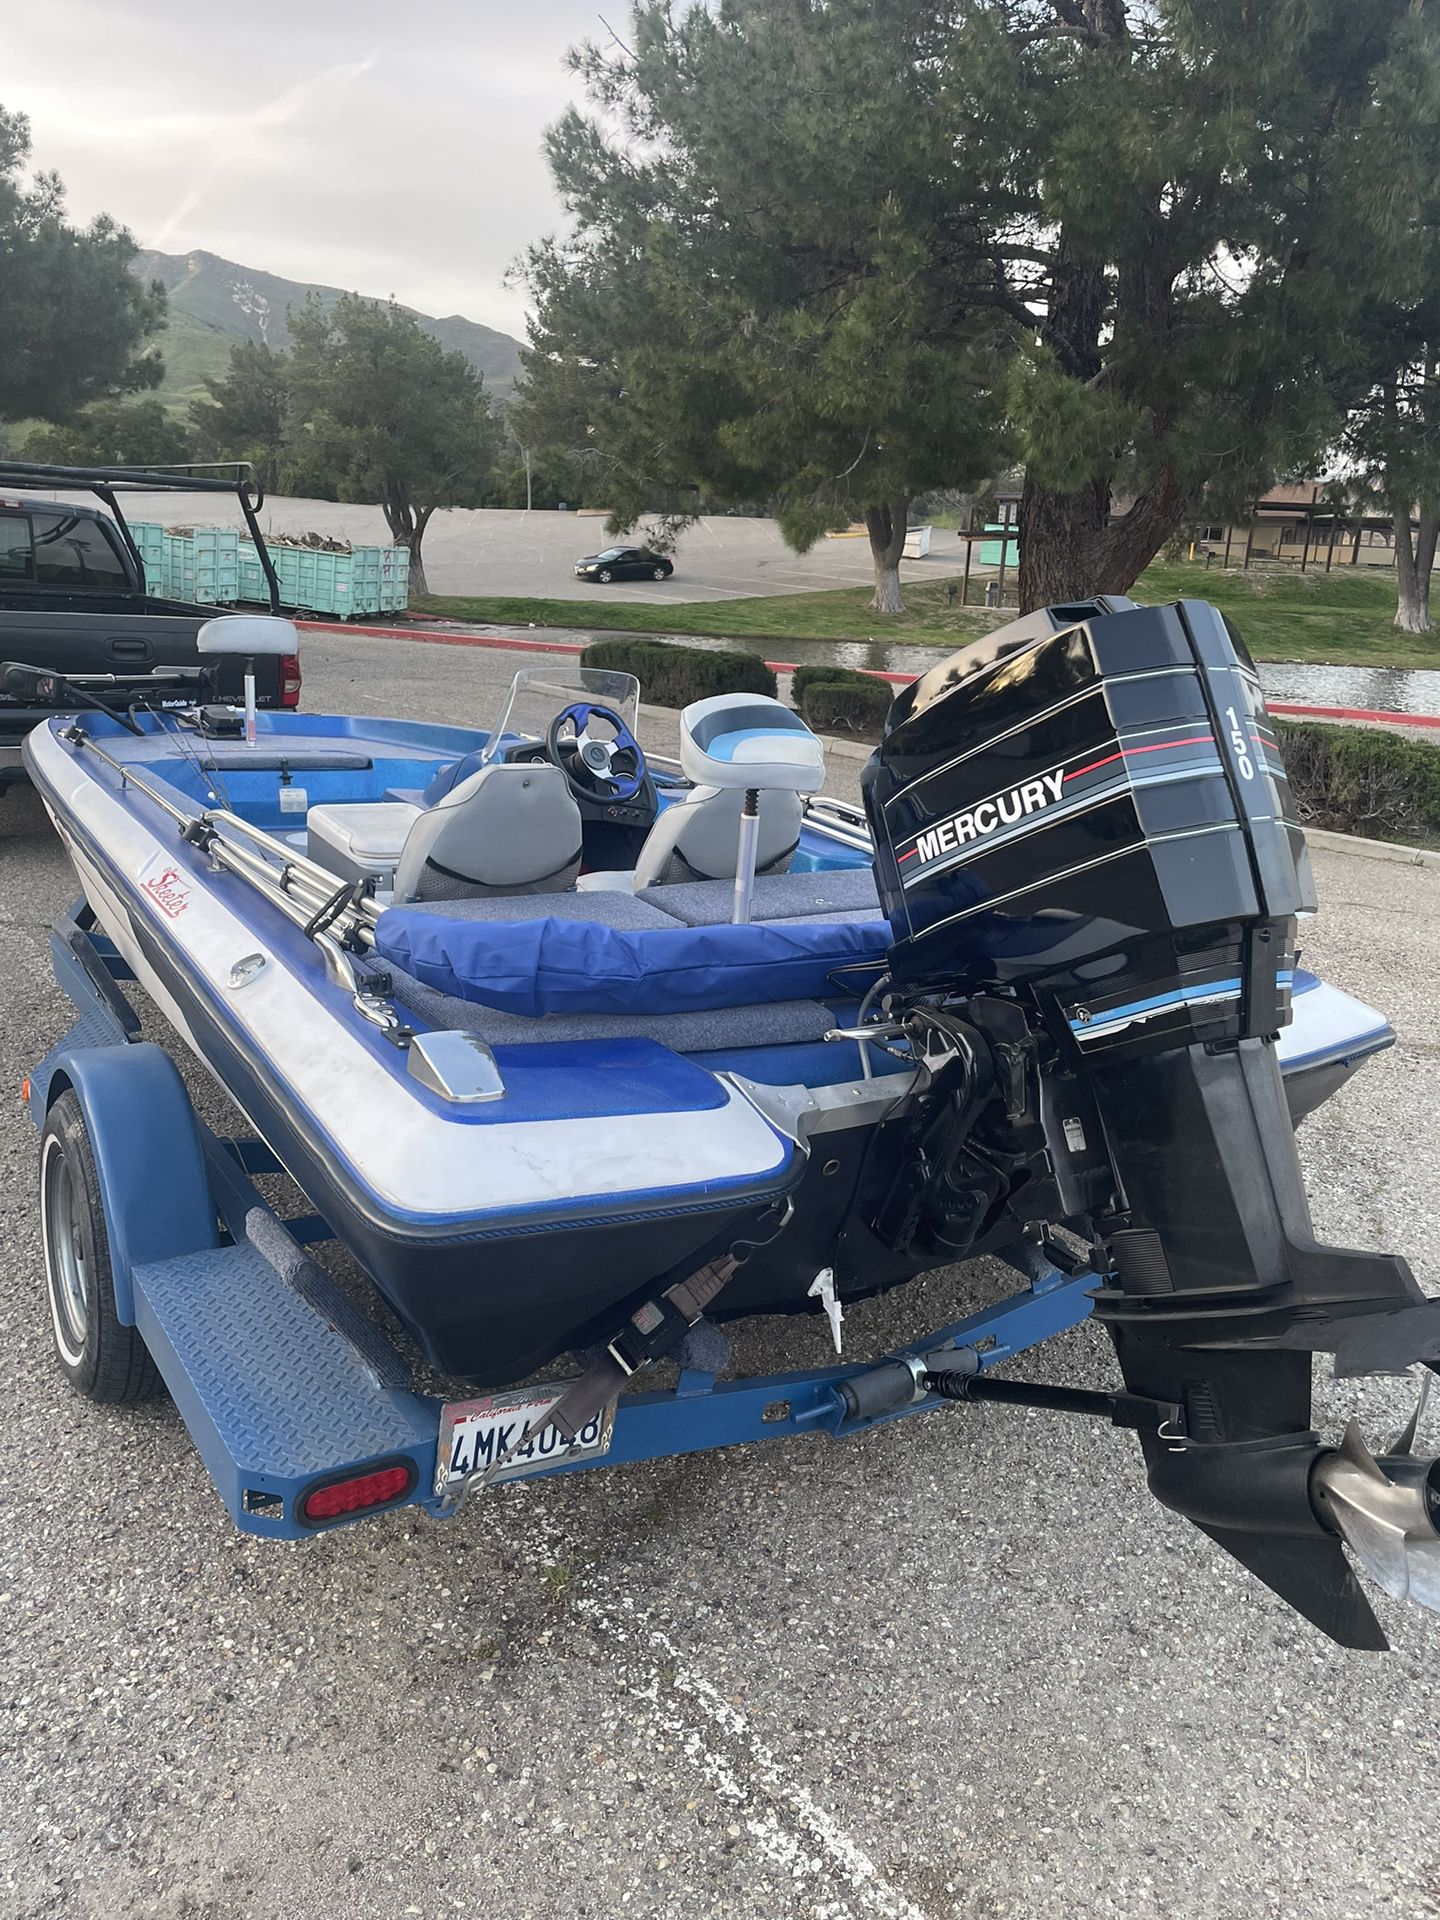 Bass Boat For Sale